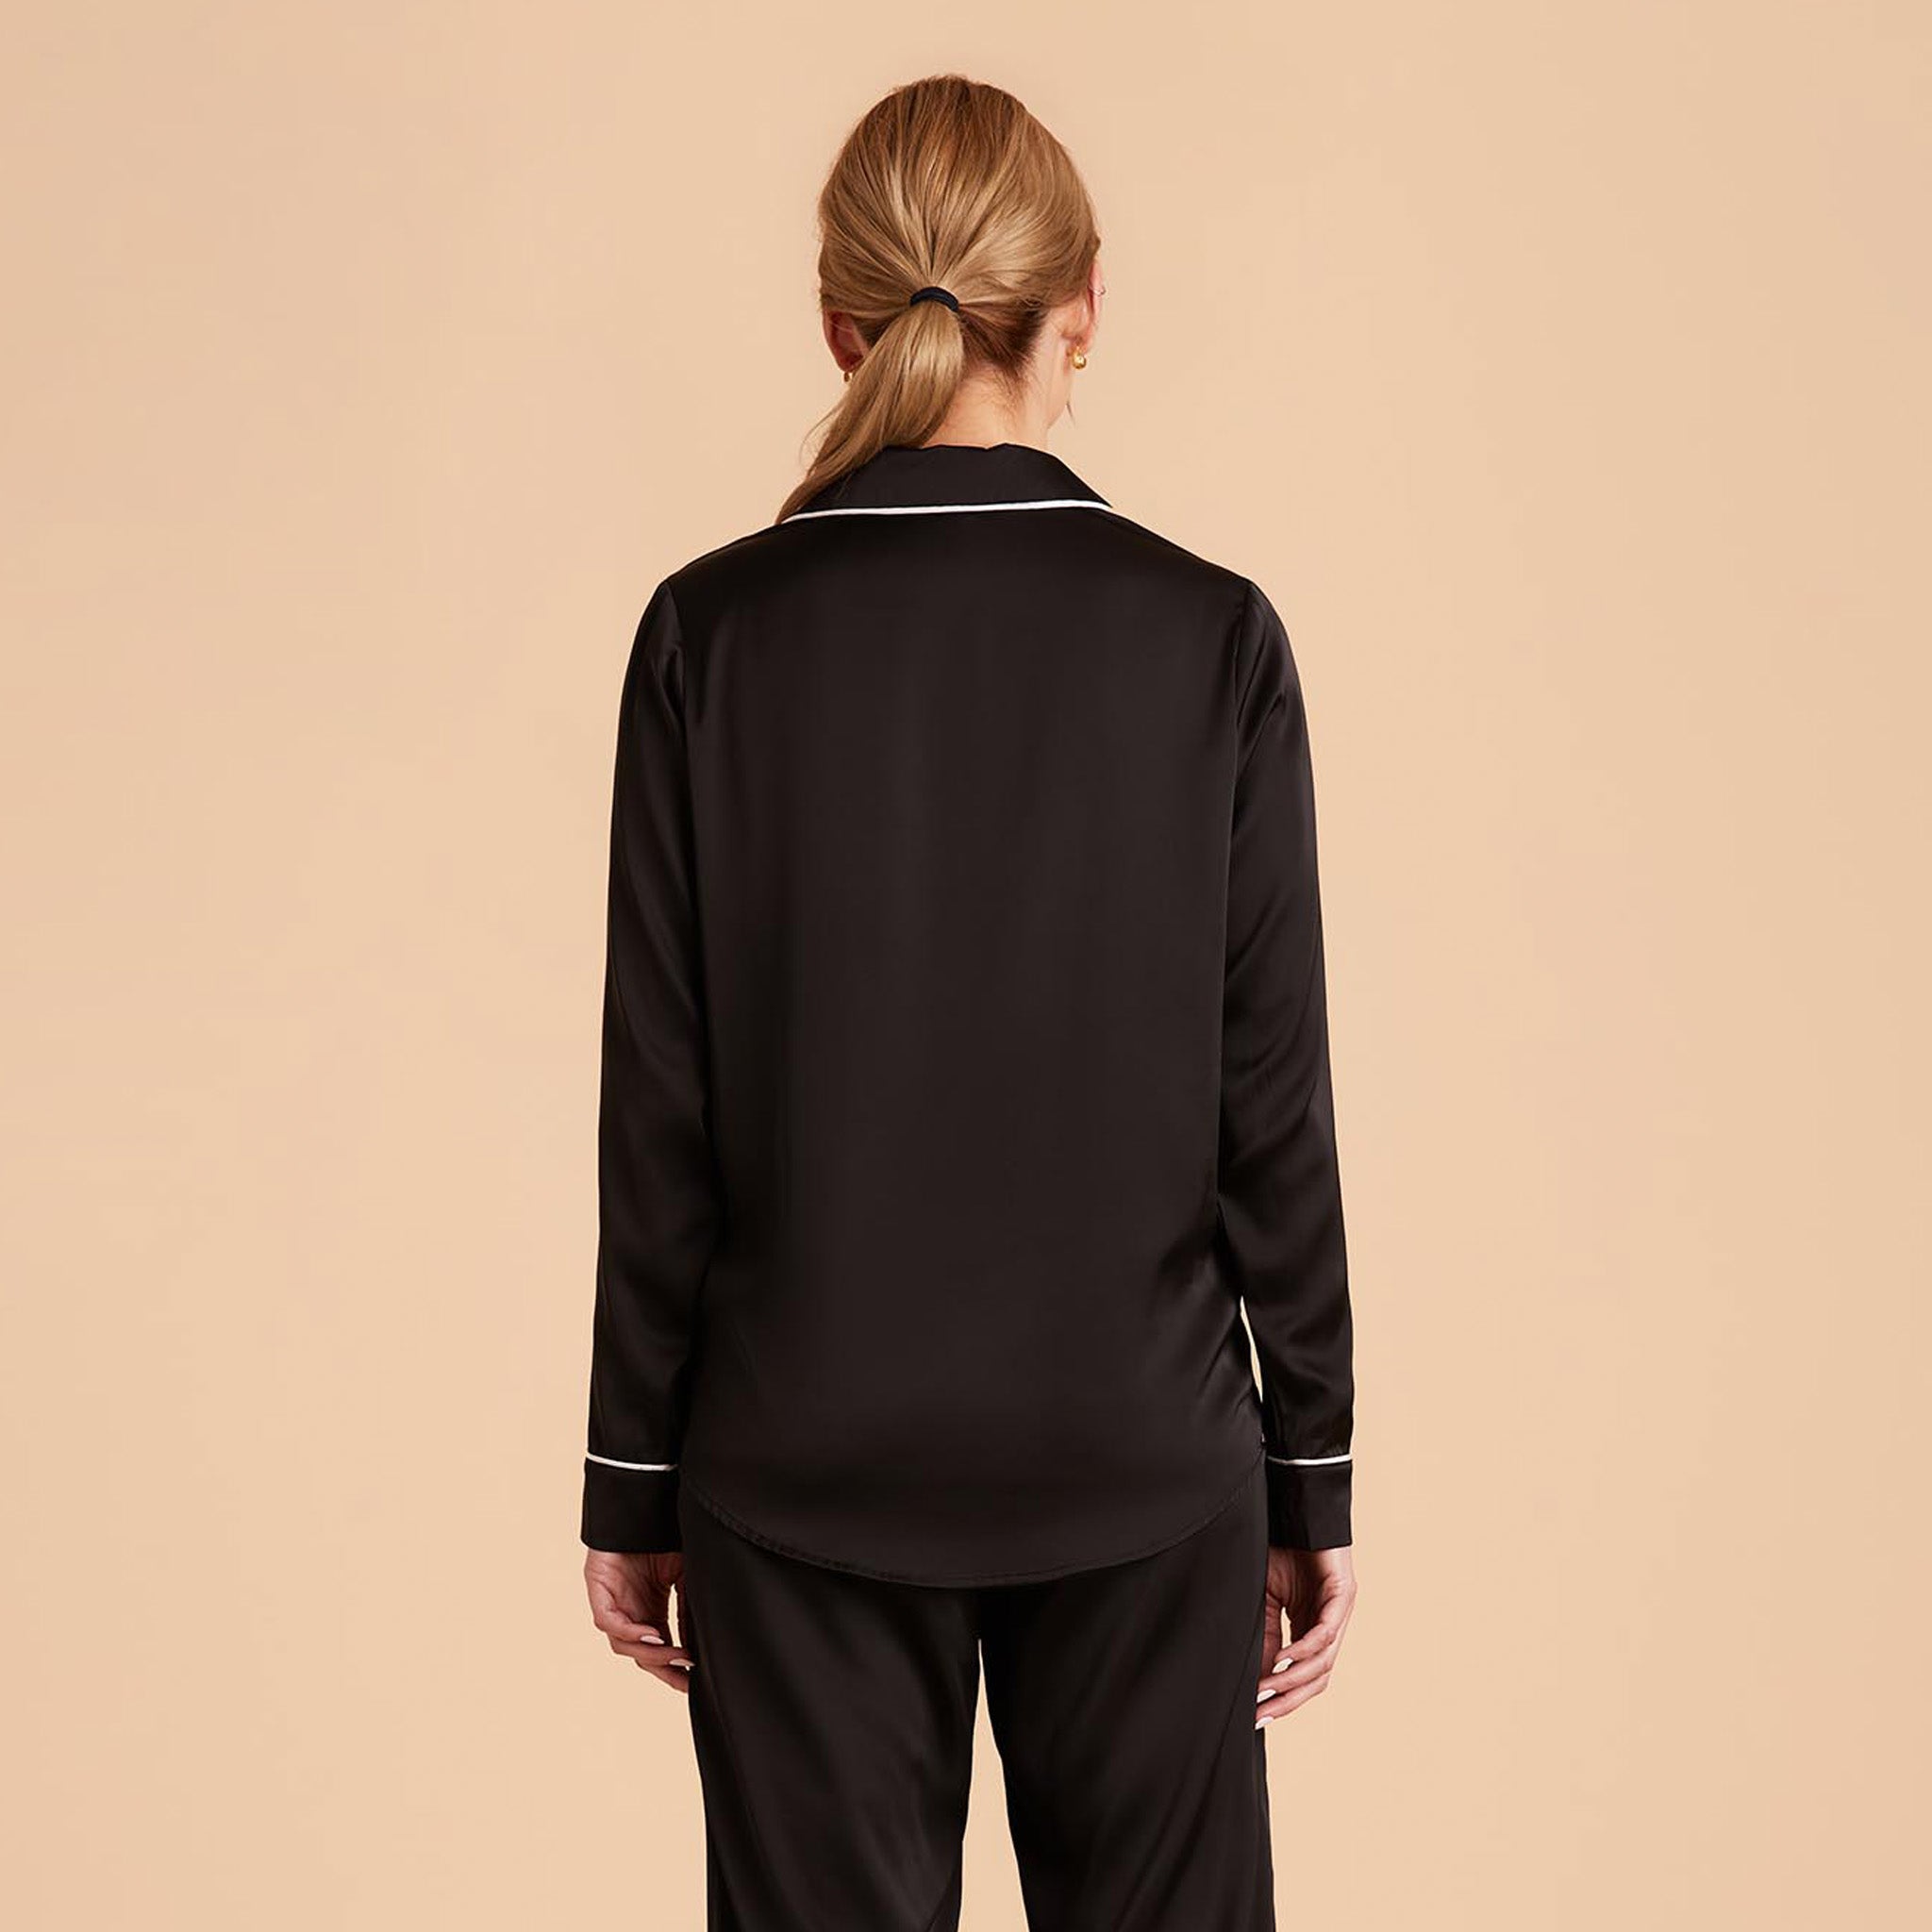 Jonny Satin Long Sleeve Pajama Top With White Piping in black, back view